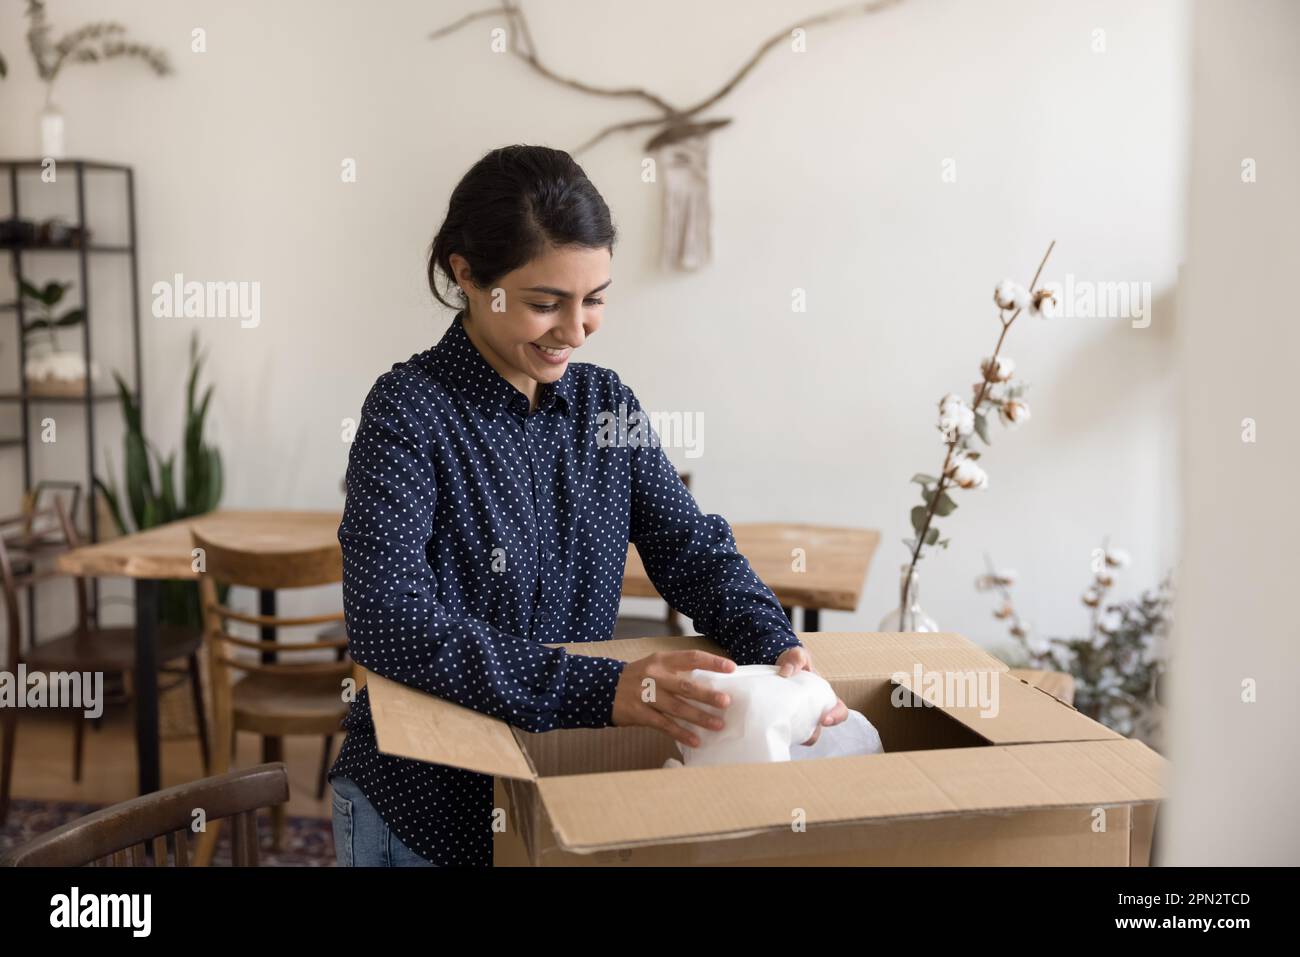 Indian woman opens parcel feels satisfied with good online shopping Stock Photo